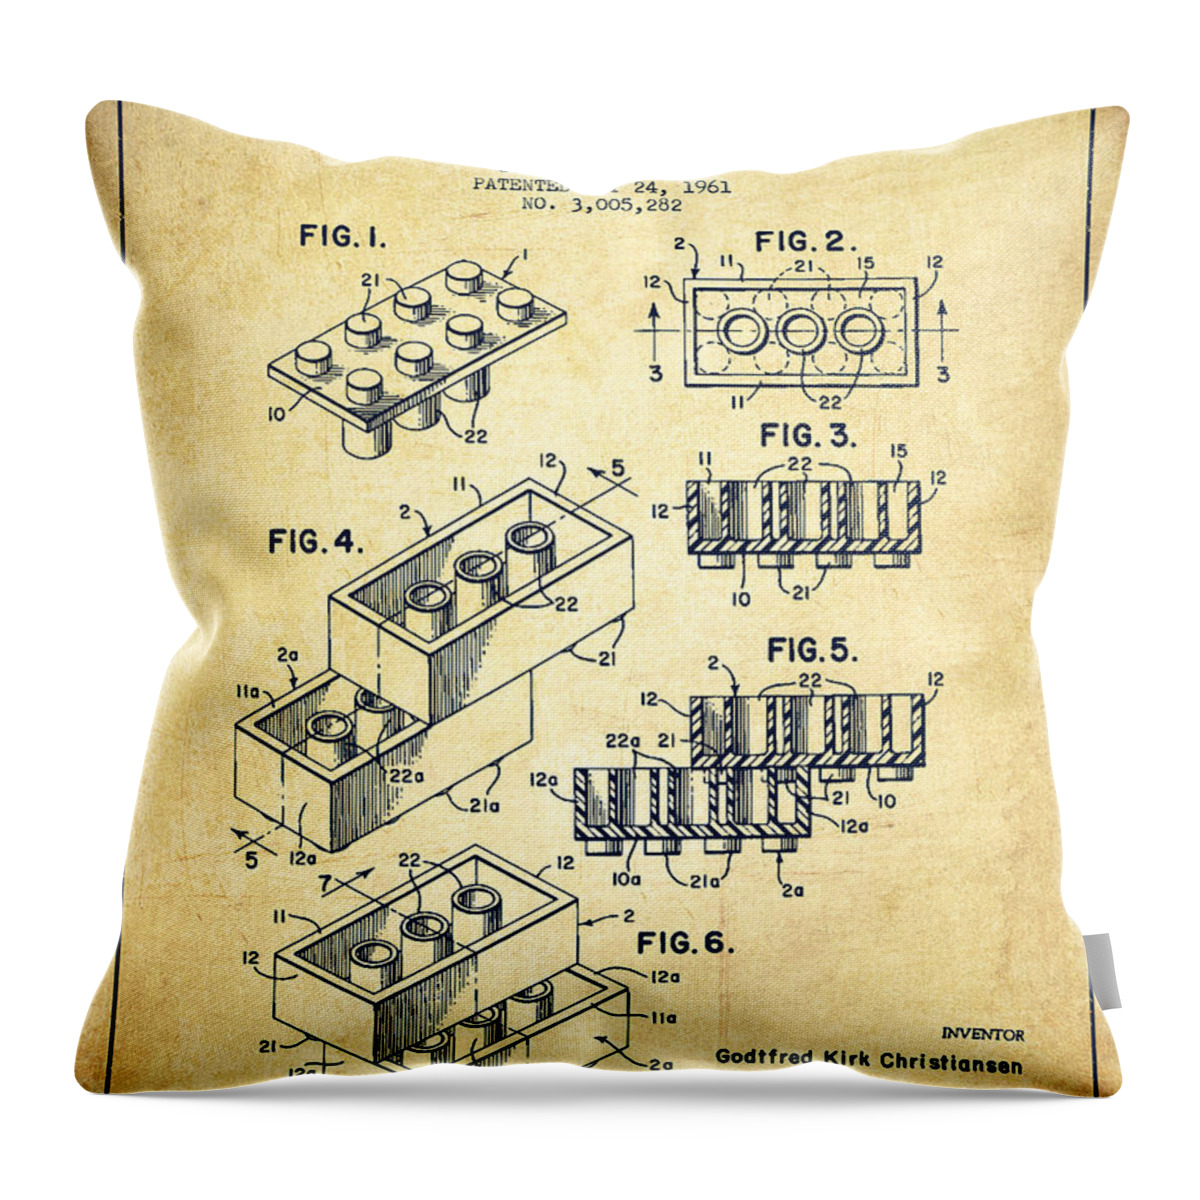 Lego Throw Pillow featuring the digital art Lego Toy Building Brick Patent - Vintage by Aged Pixel